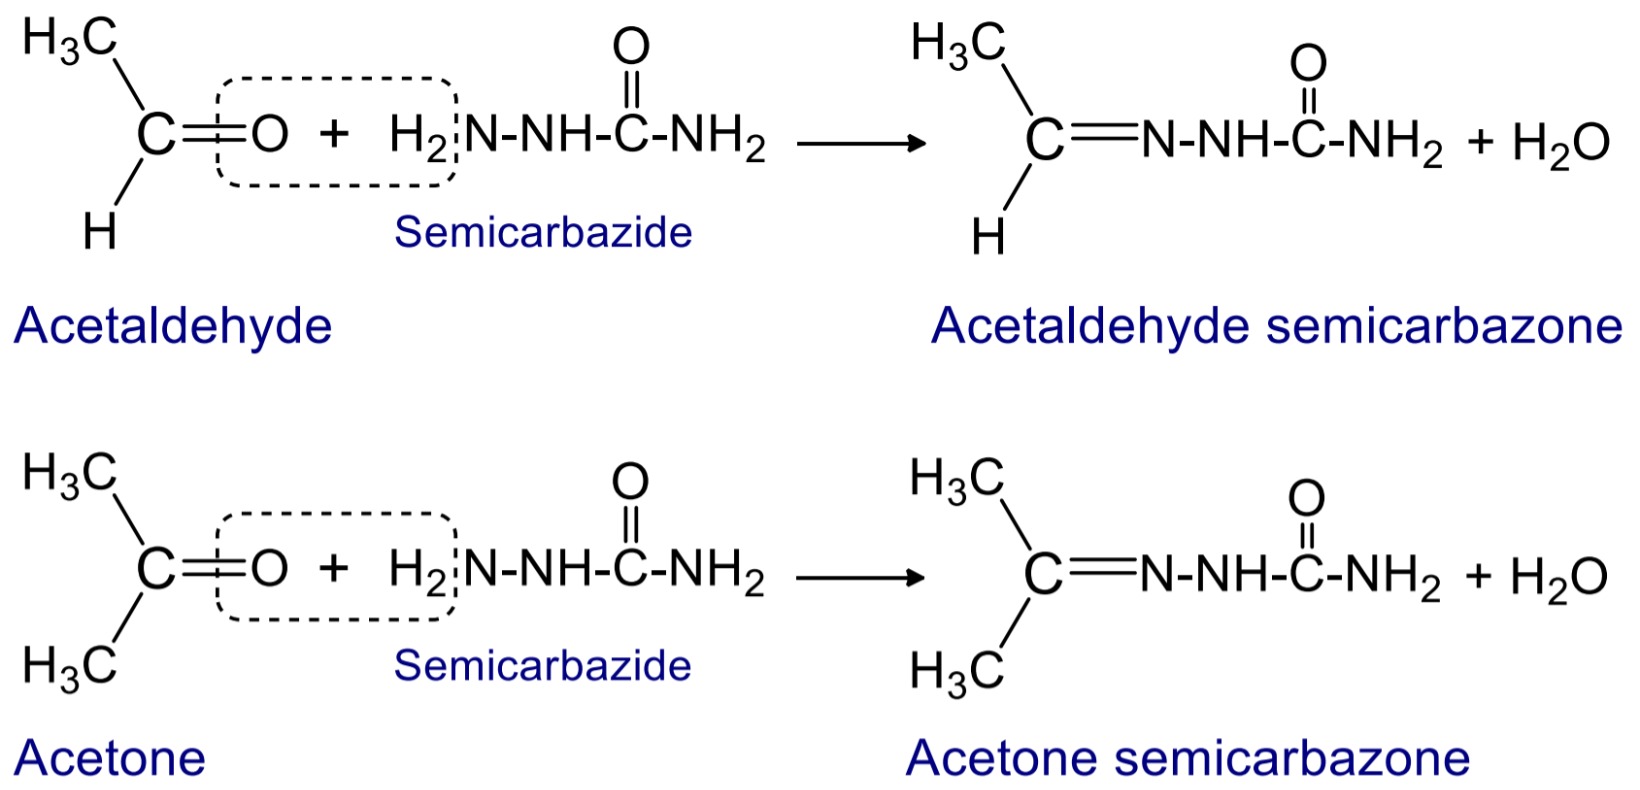 When aldehyde and ketone reacts with semicarbazide then crystalline ppt. of semicarbazone is formed.